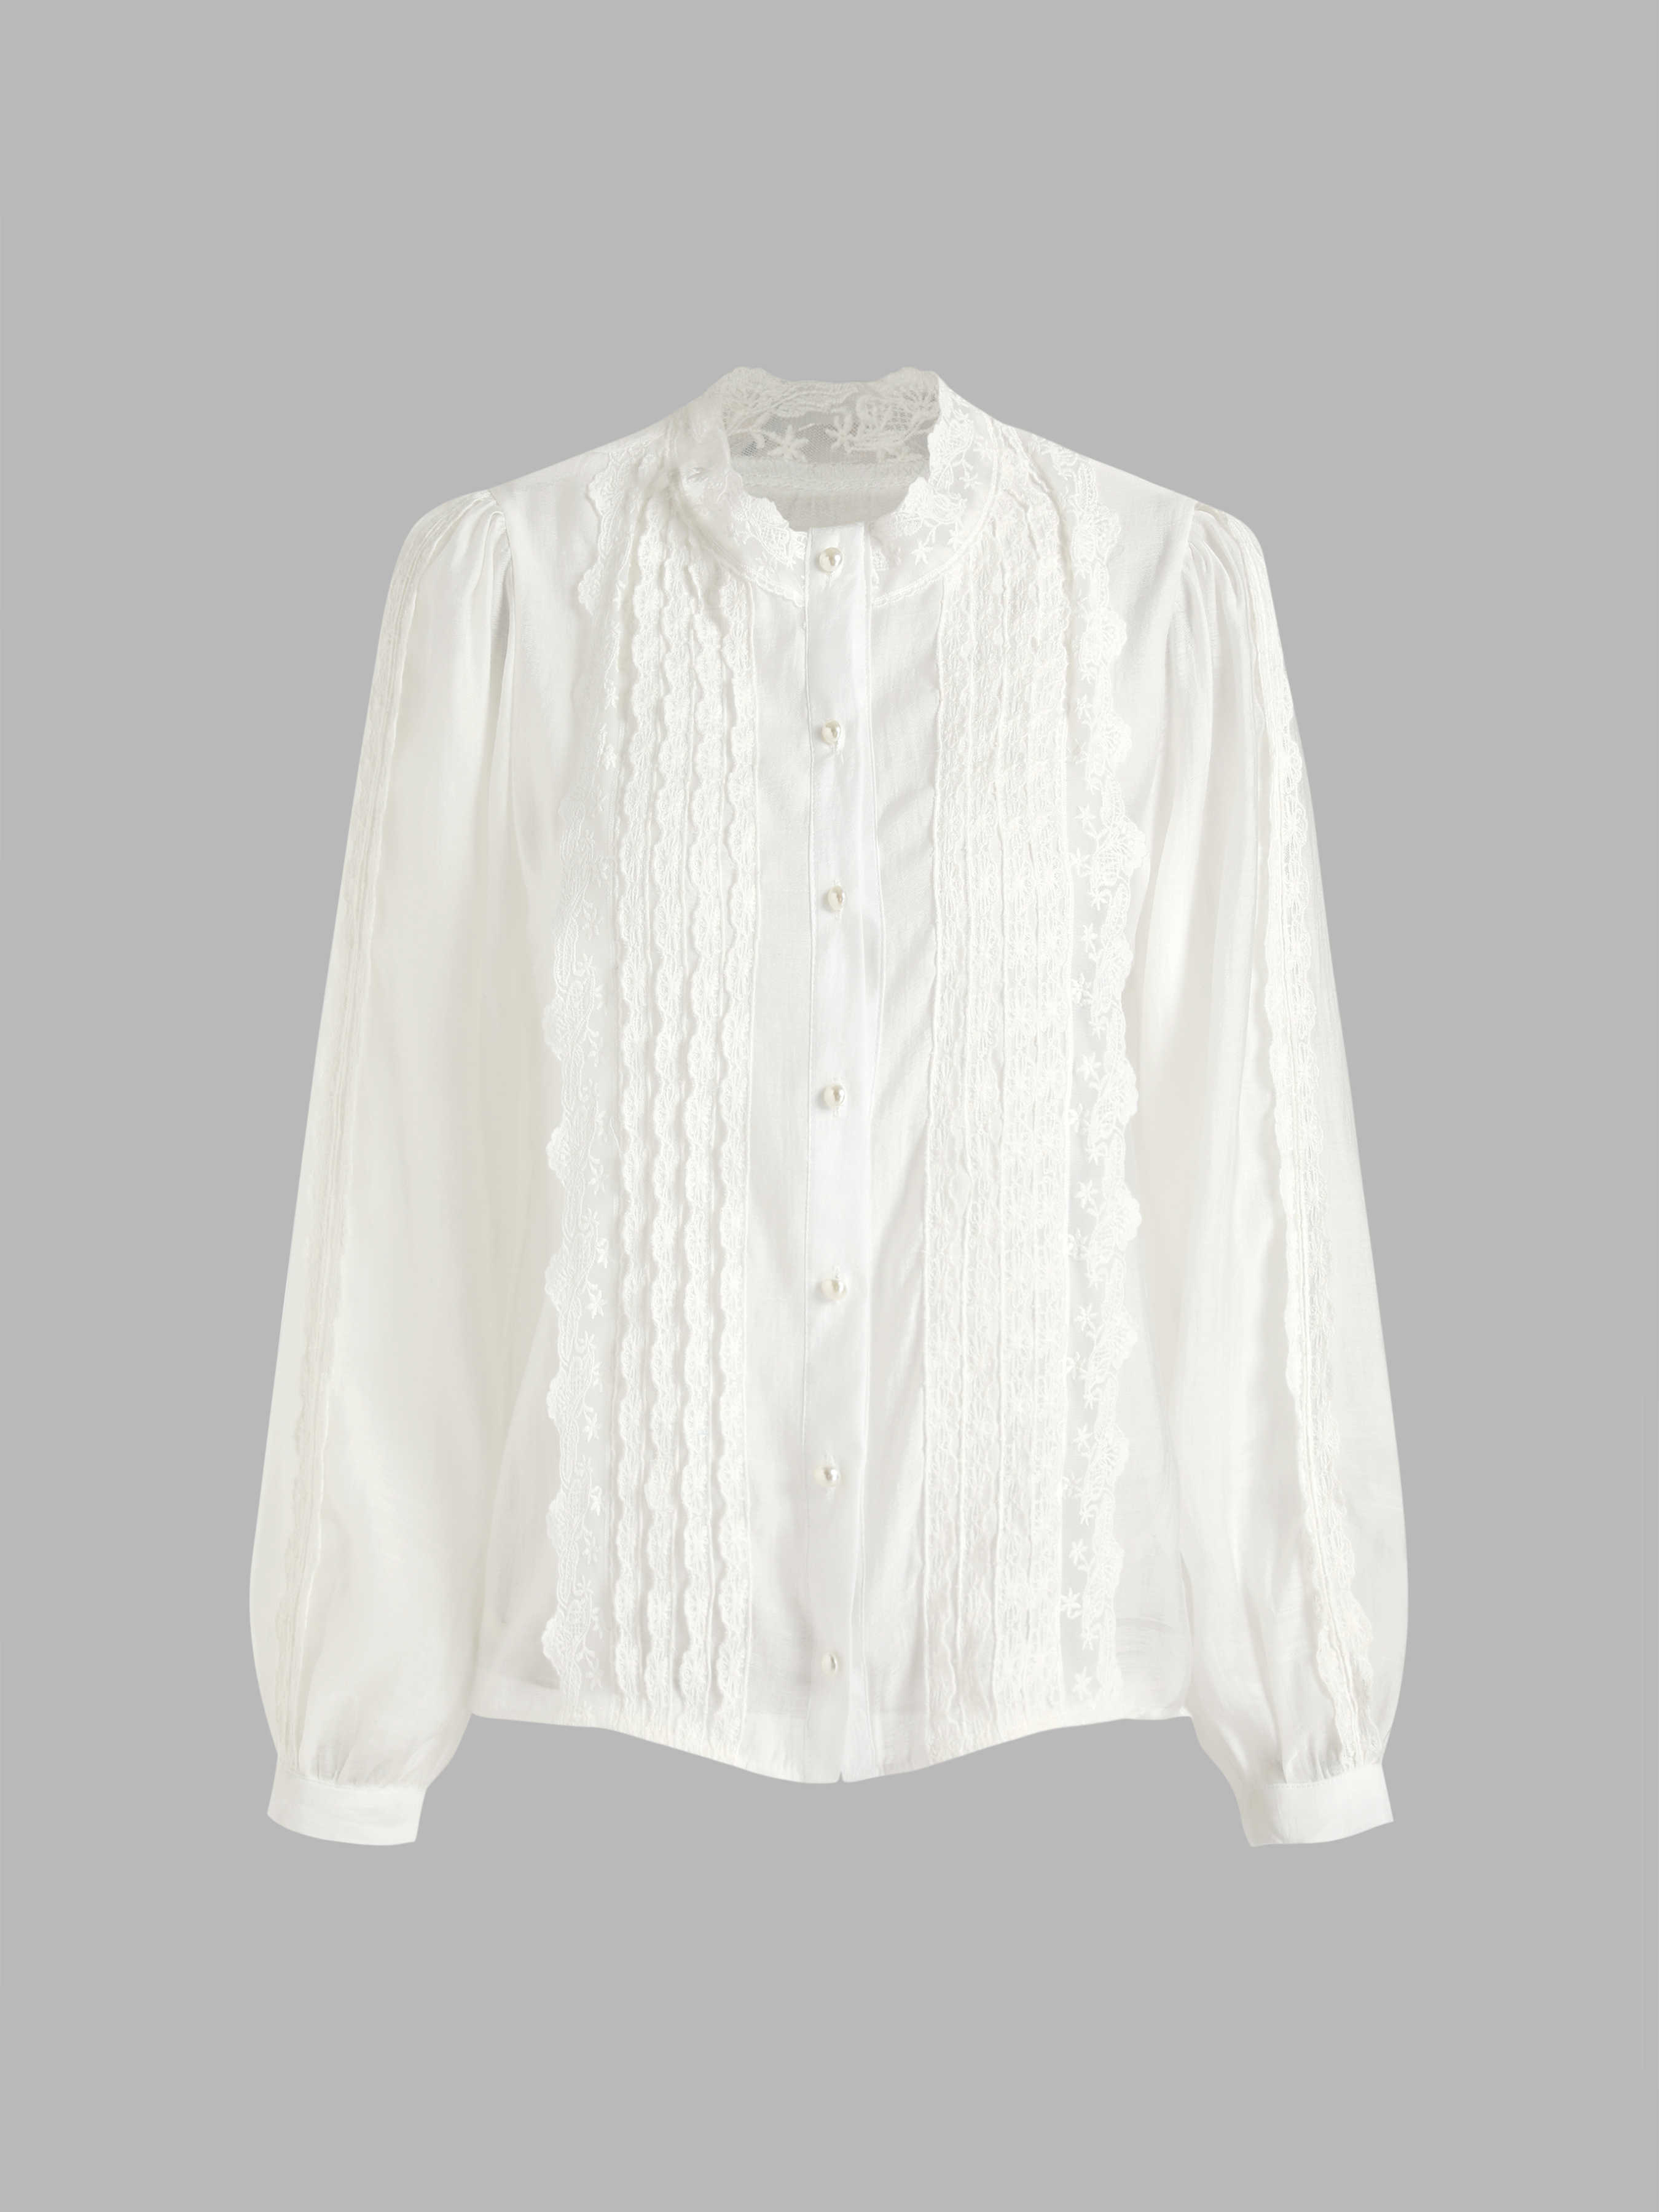 Lace Pearl Button Blouse - Cider